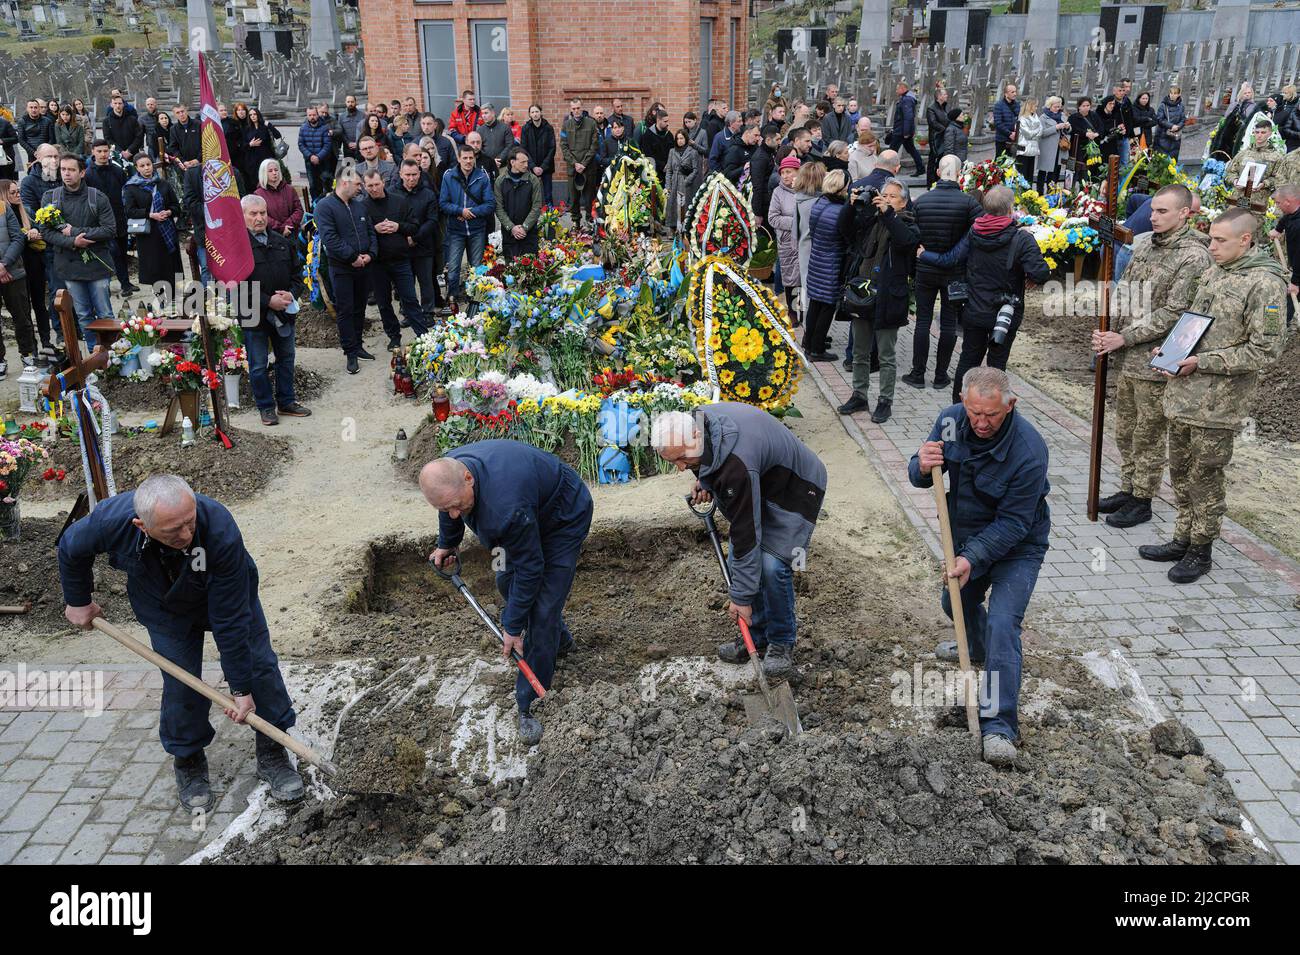 Lviv, Ukraine. 31st Mar, 2022. People seen covering the grave during the burial. Funeral ceremony of 3 Ukrainian soldiers Kozachenko Andriy, Sarkisyan Ihor, Oliynyk Yuriy killed by Russian forces amid the Russian invasion in Lviv. (Credit Image: © Mykola Tys/SOPA Images via ZUMA Press Wire) Stock Photo